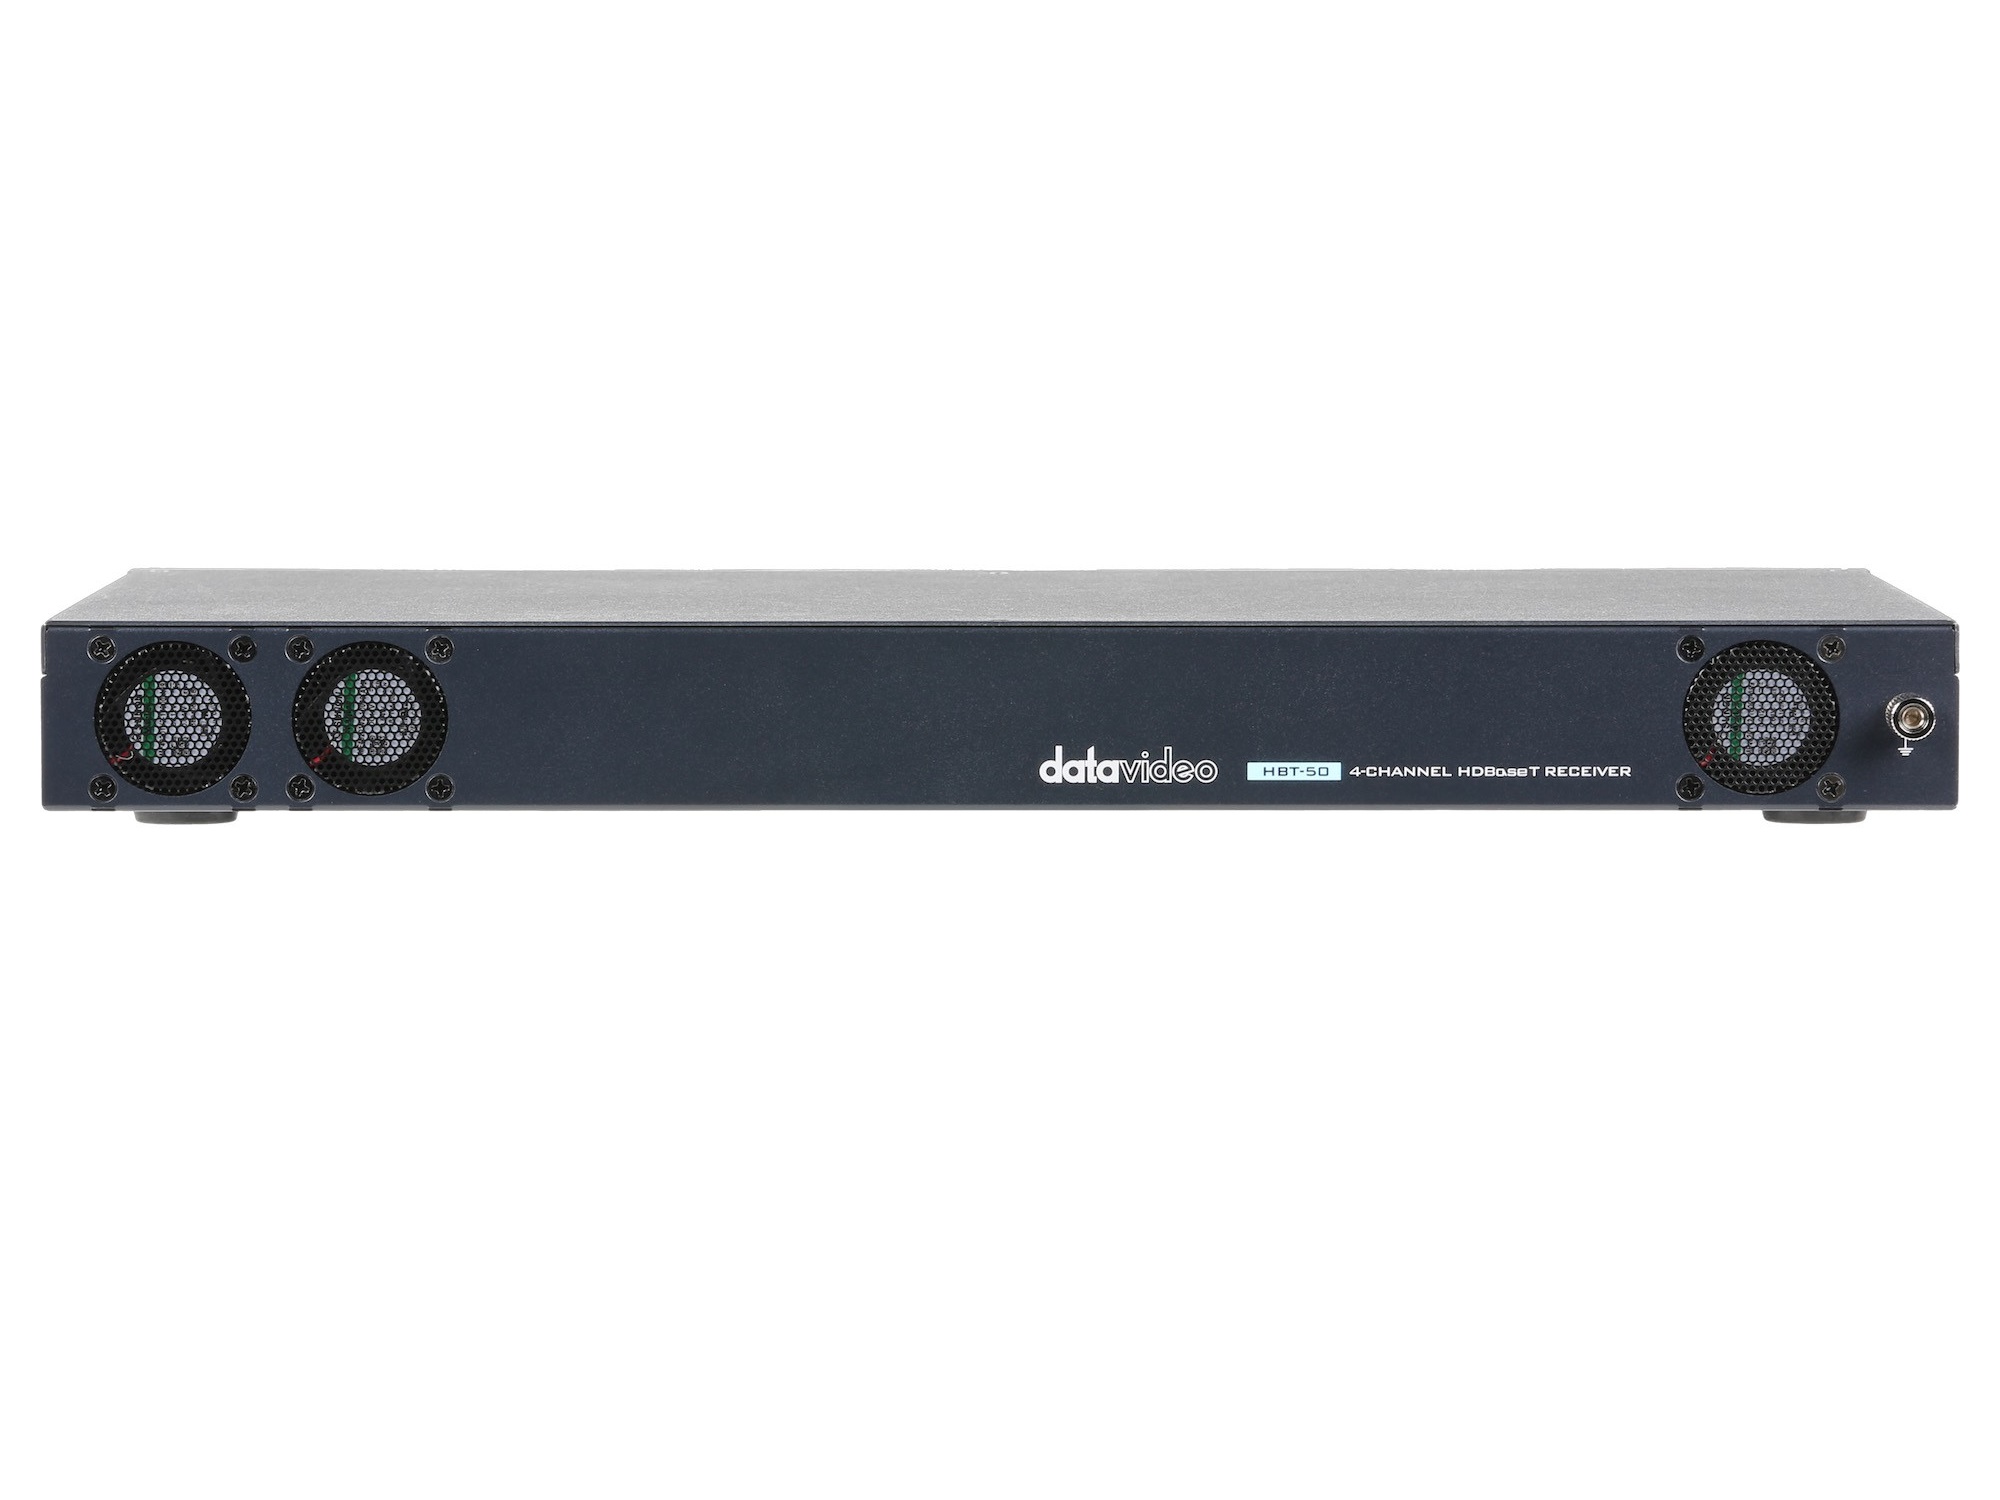 HBT-50 4-Channel HDBaseT Receiver with SDI and HDMI Outputs by Datavideo